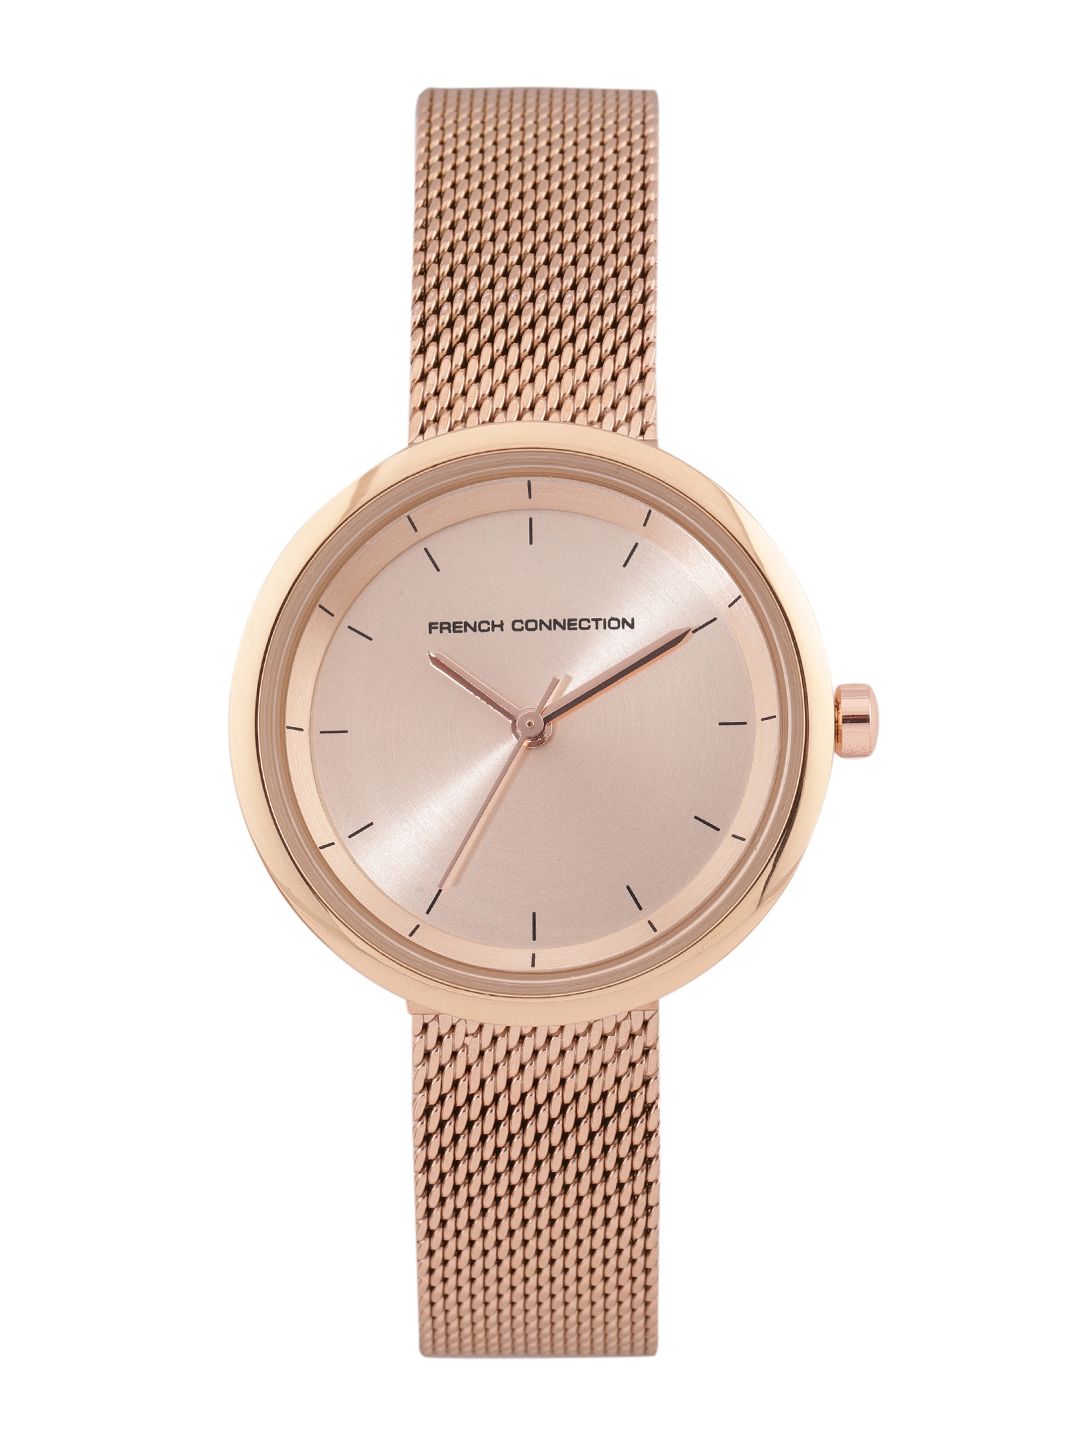 French Connection Women Rose Gold-Toned Analogue Watch FCN00036C Price in India